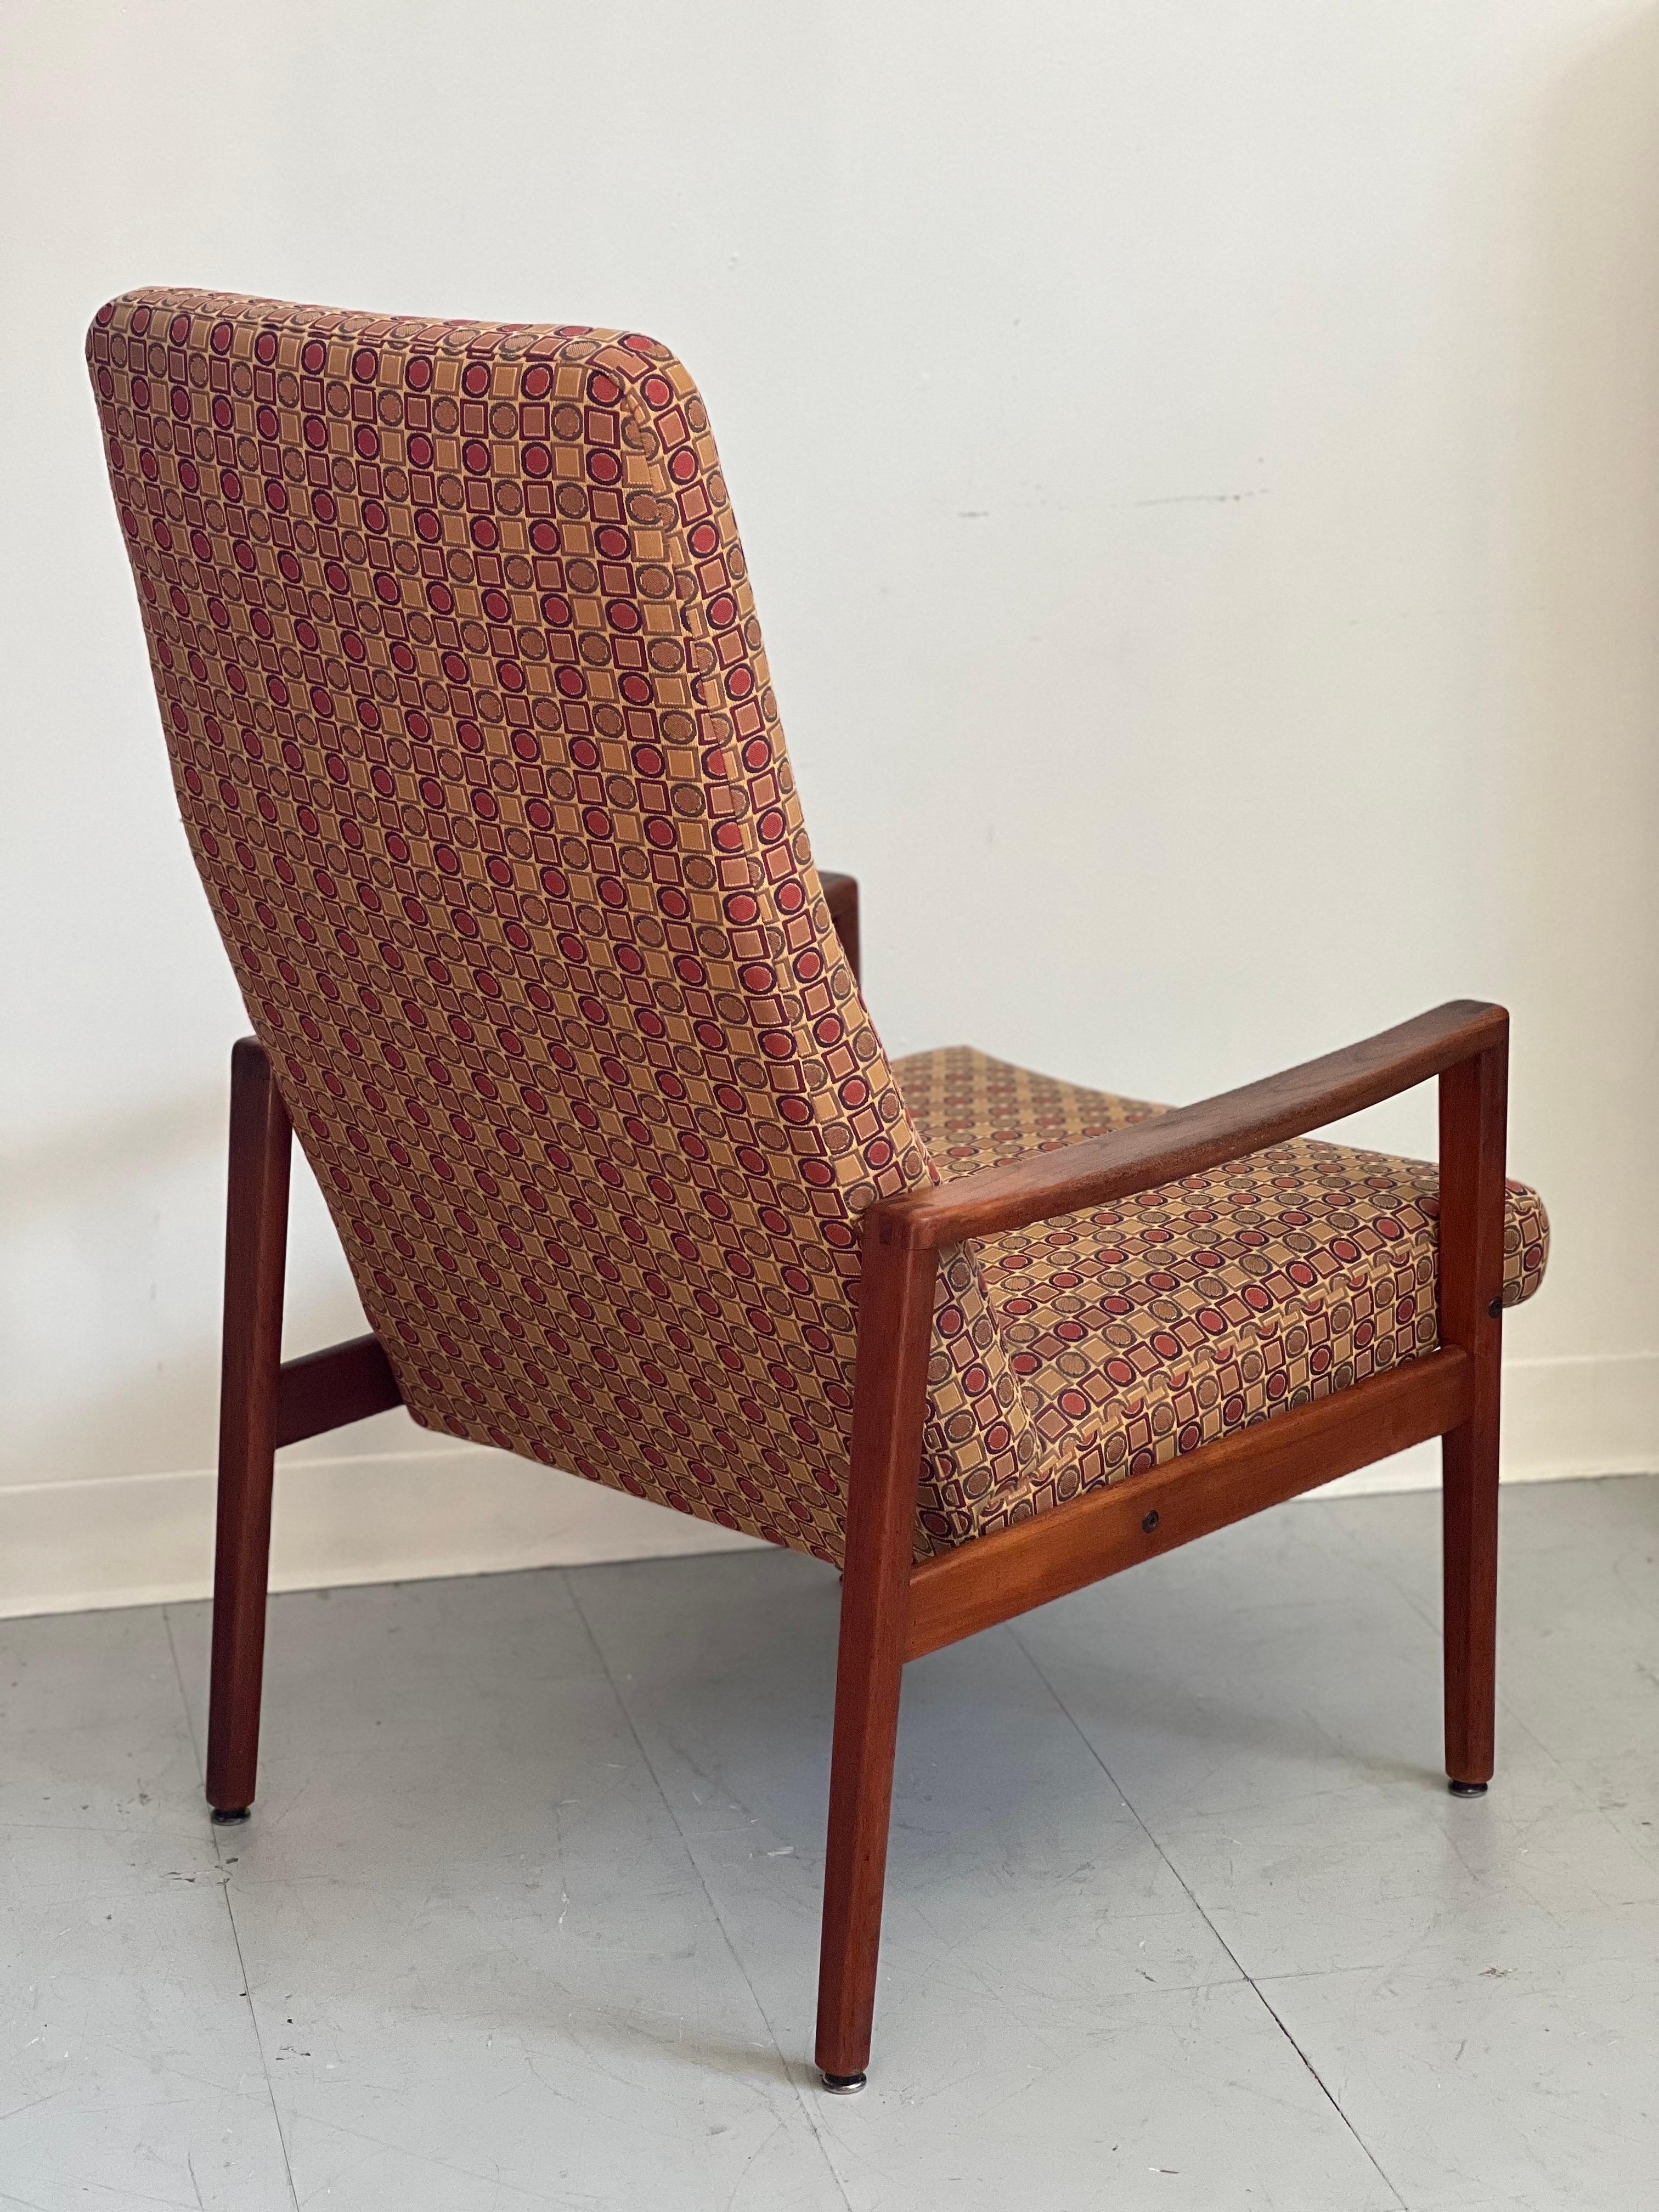 Vintage Danish Mid Century Modern Chair by Milo Baughman In Good Condition For Sale In Seattle, WA